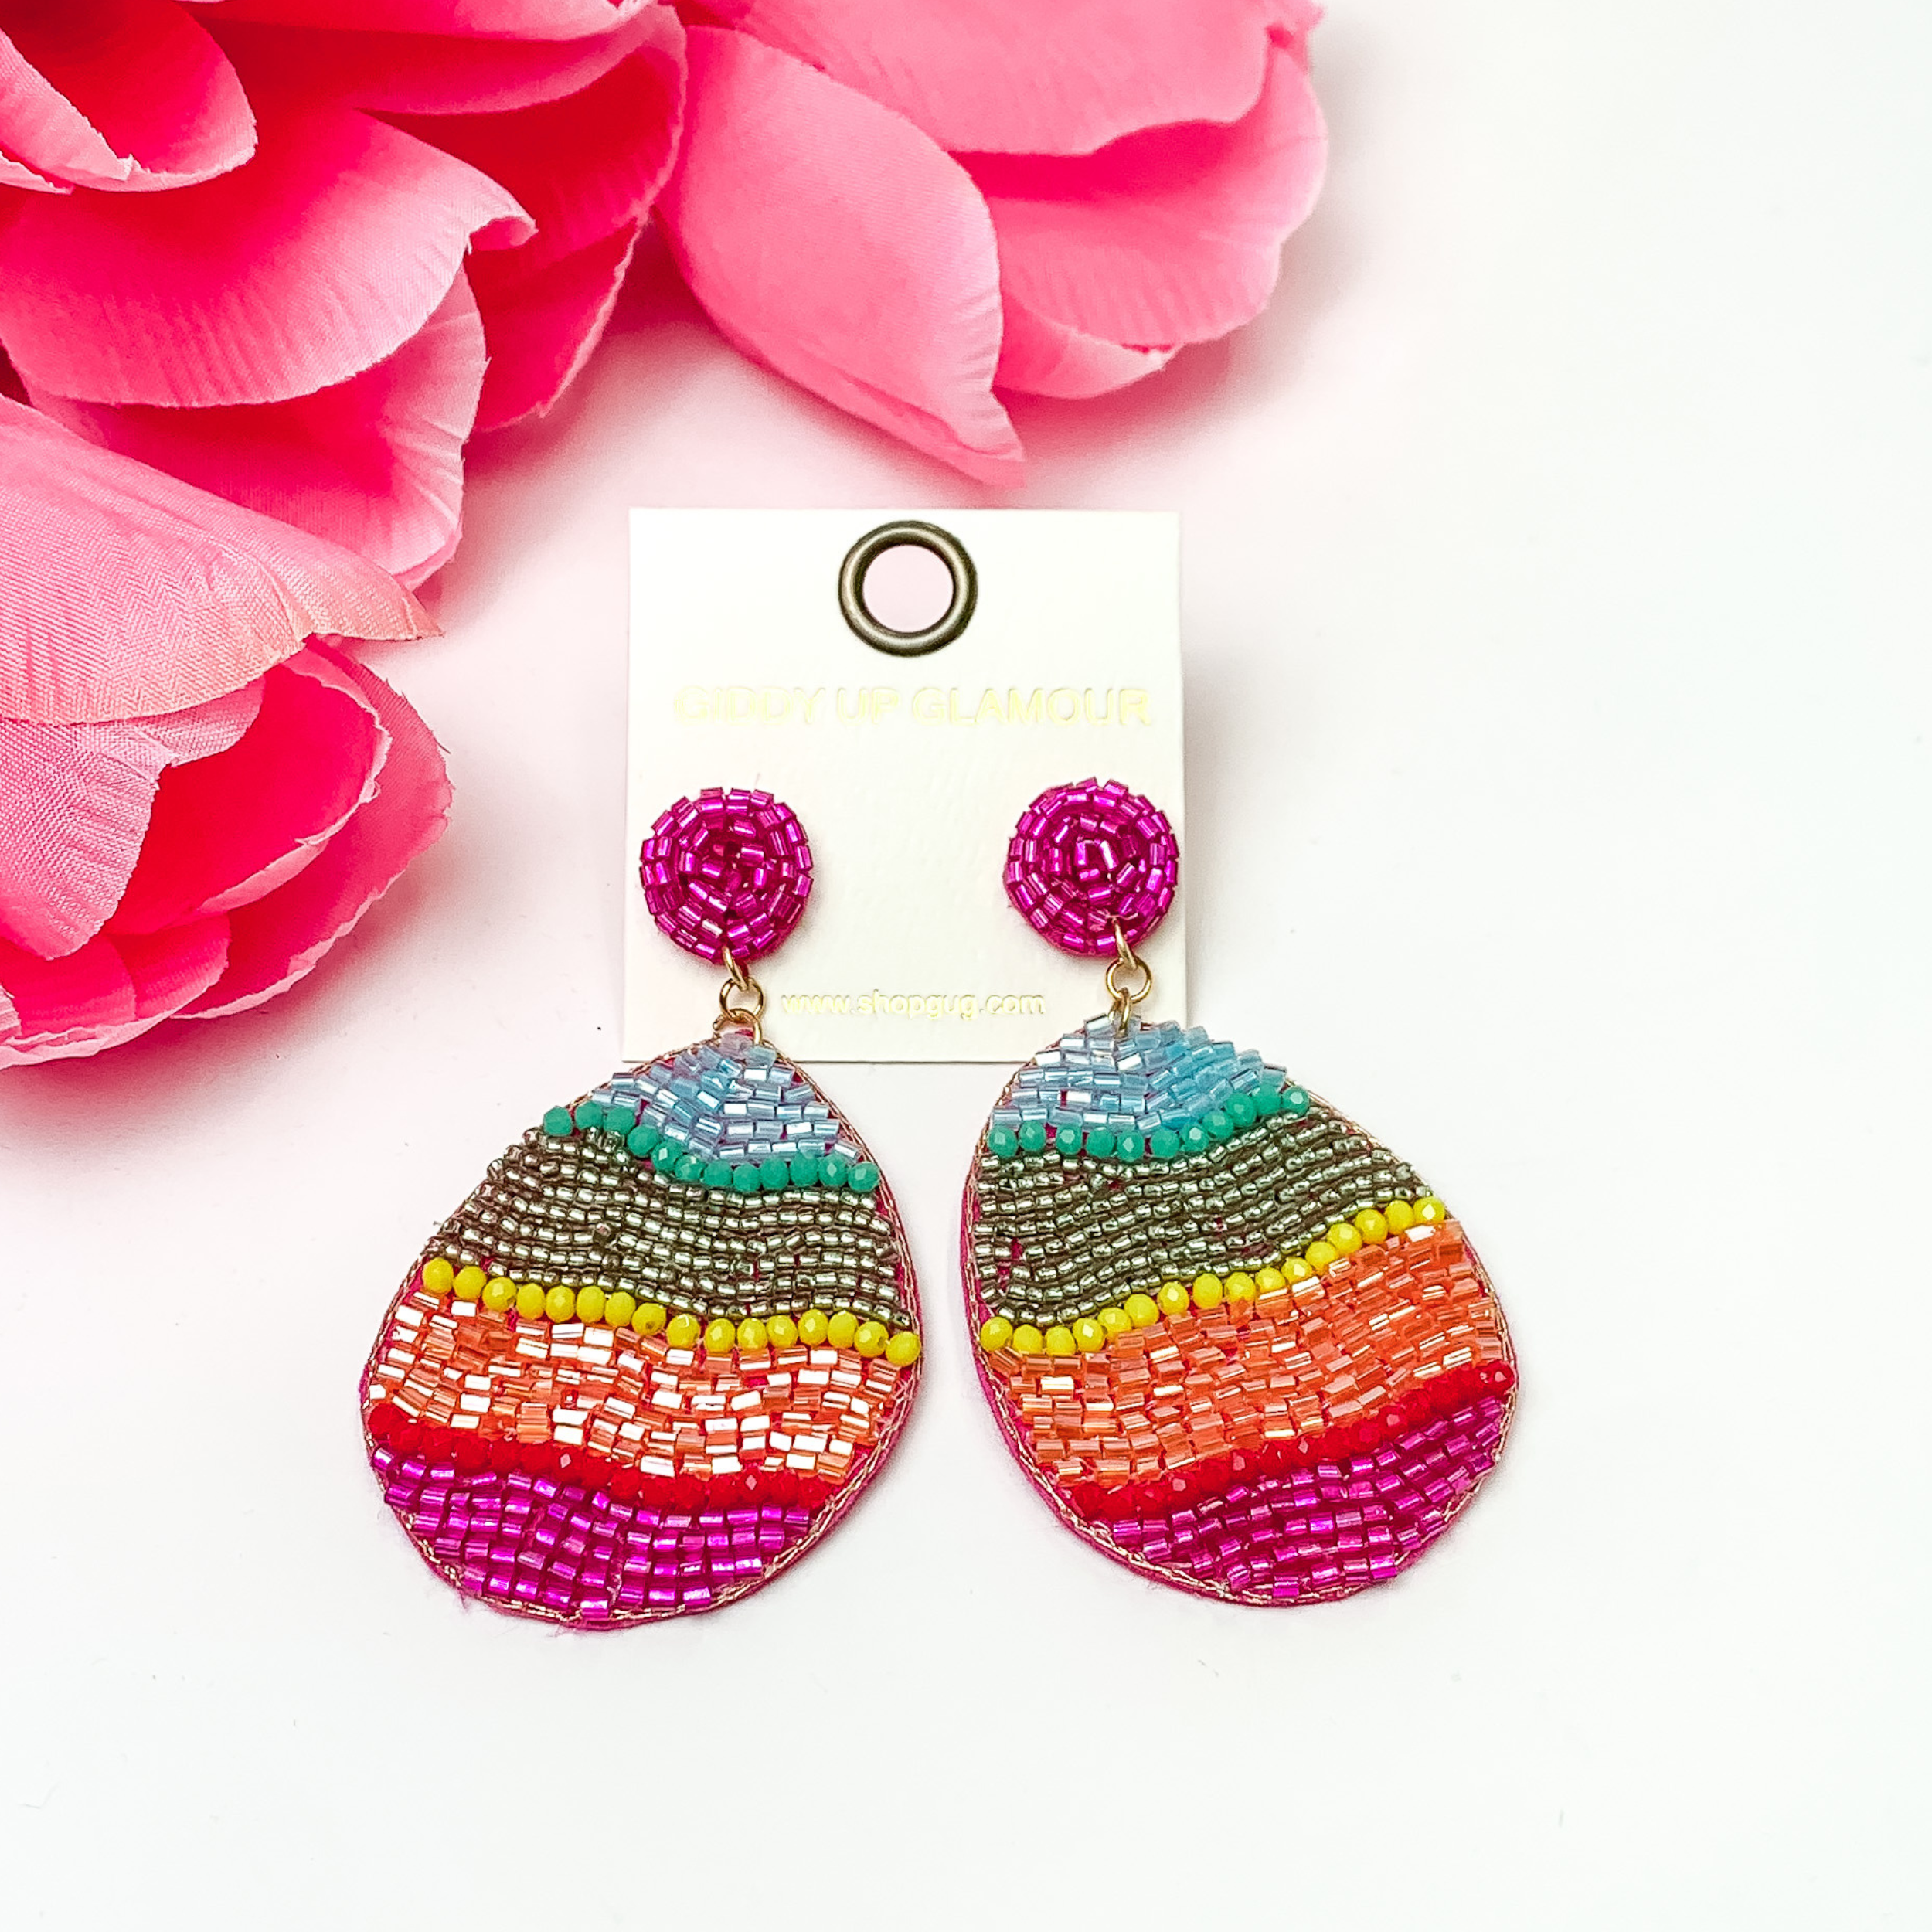 Beaded multi colored Easter egg. These earrings are pictured on a white background with red-coral flowers at the top left corner.